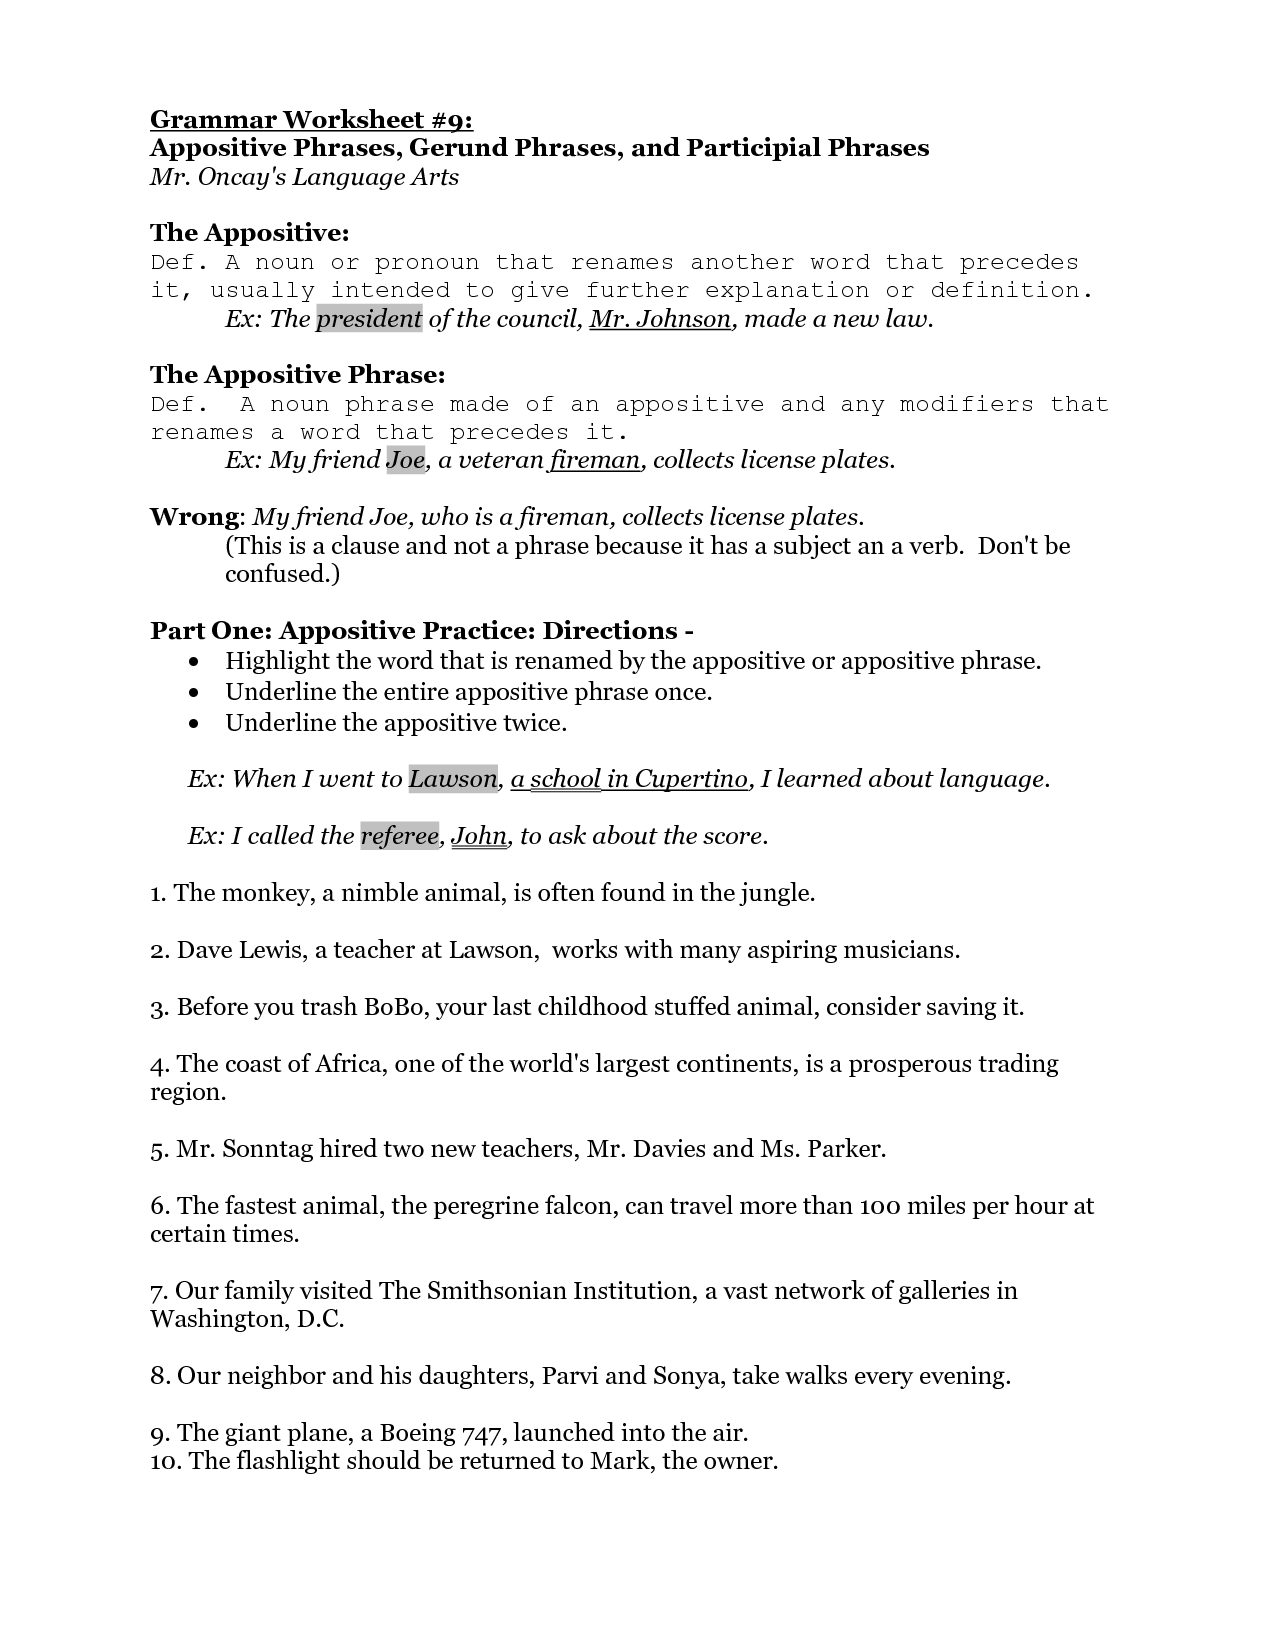 Participle Phrase Worksheets With Answers